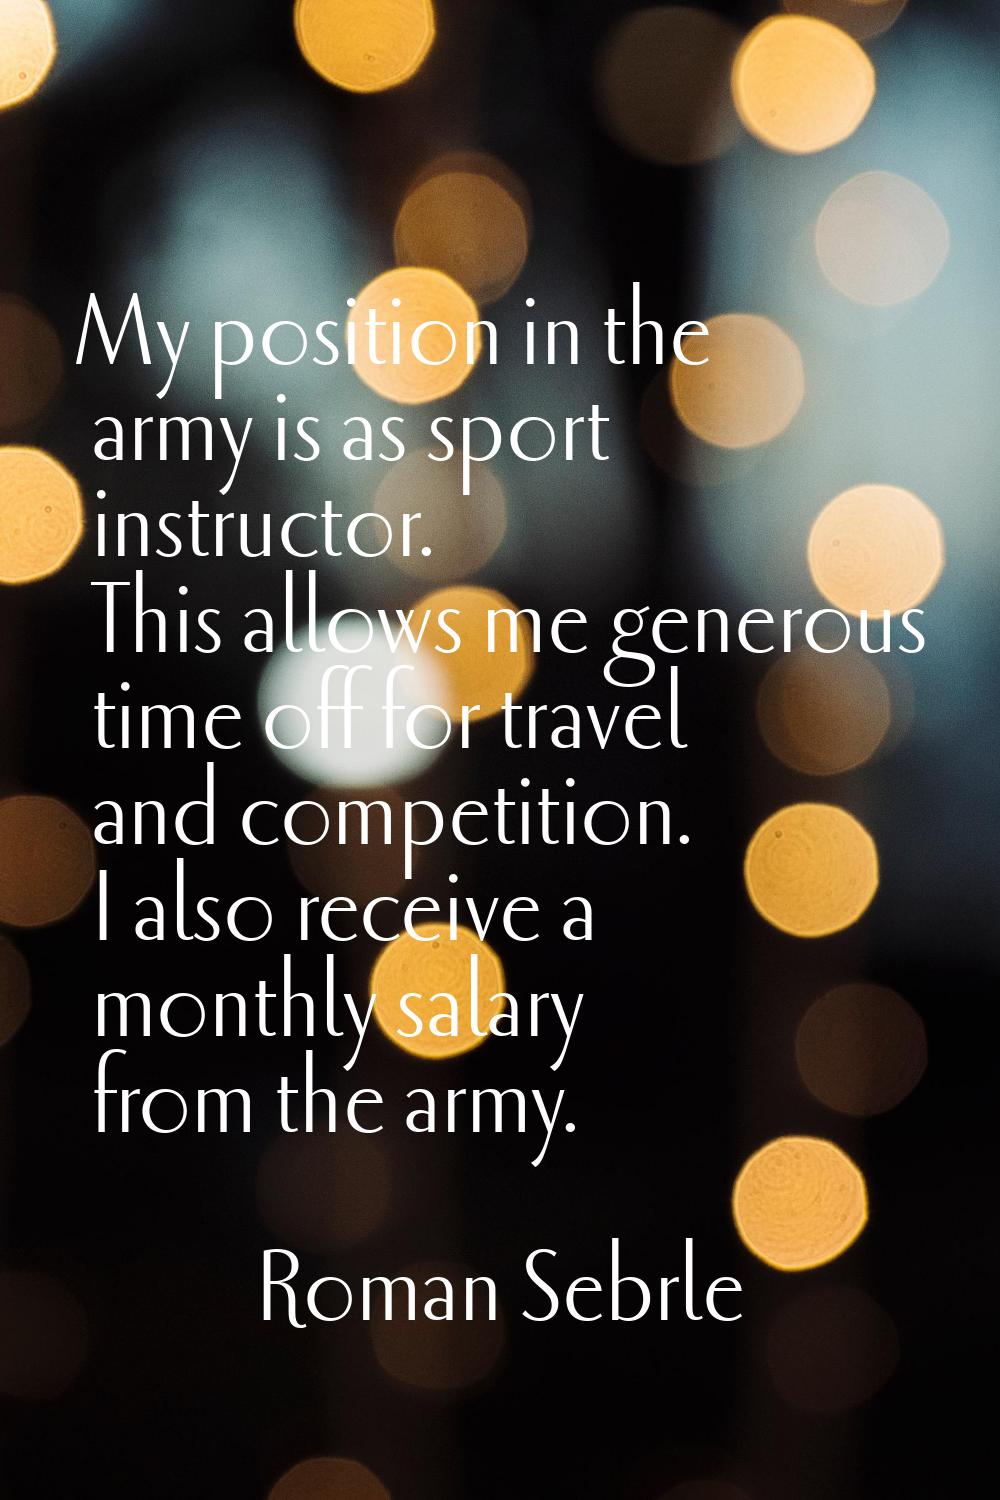 My position in the army is as sport instructor. This allows me generous time off for travel and com